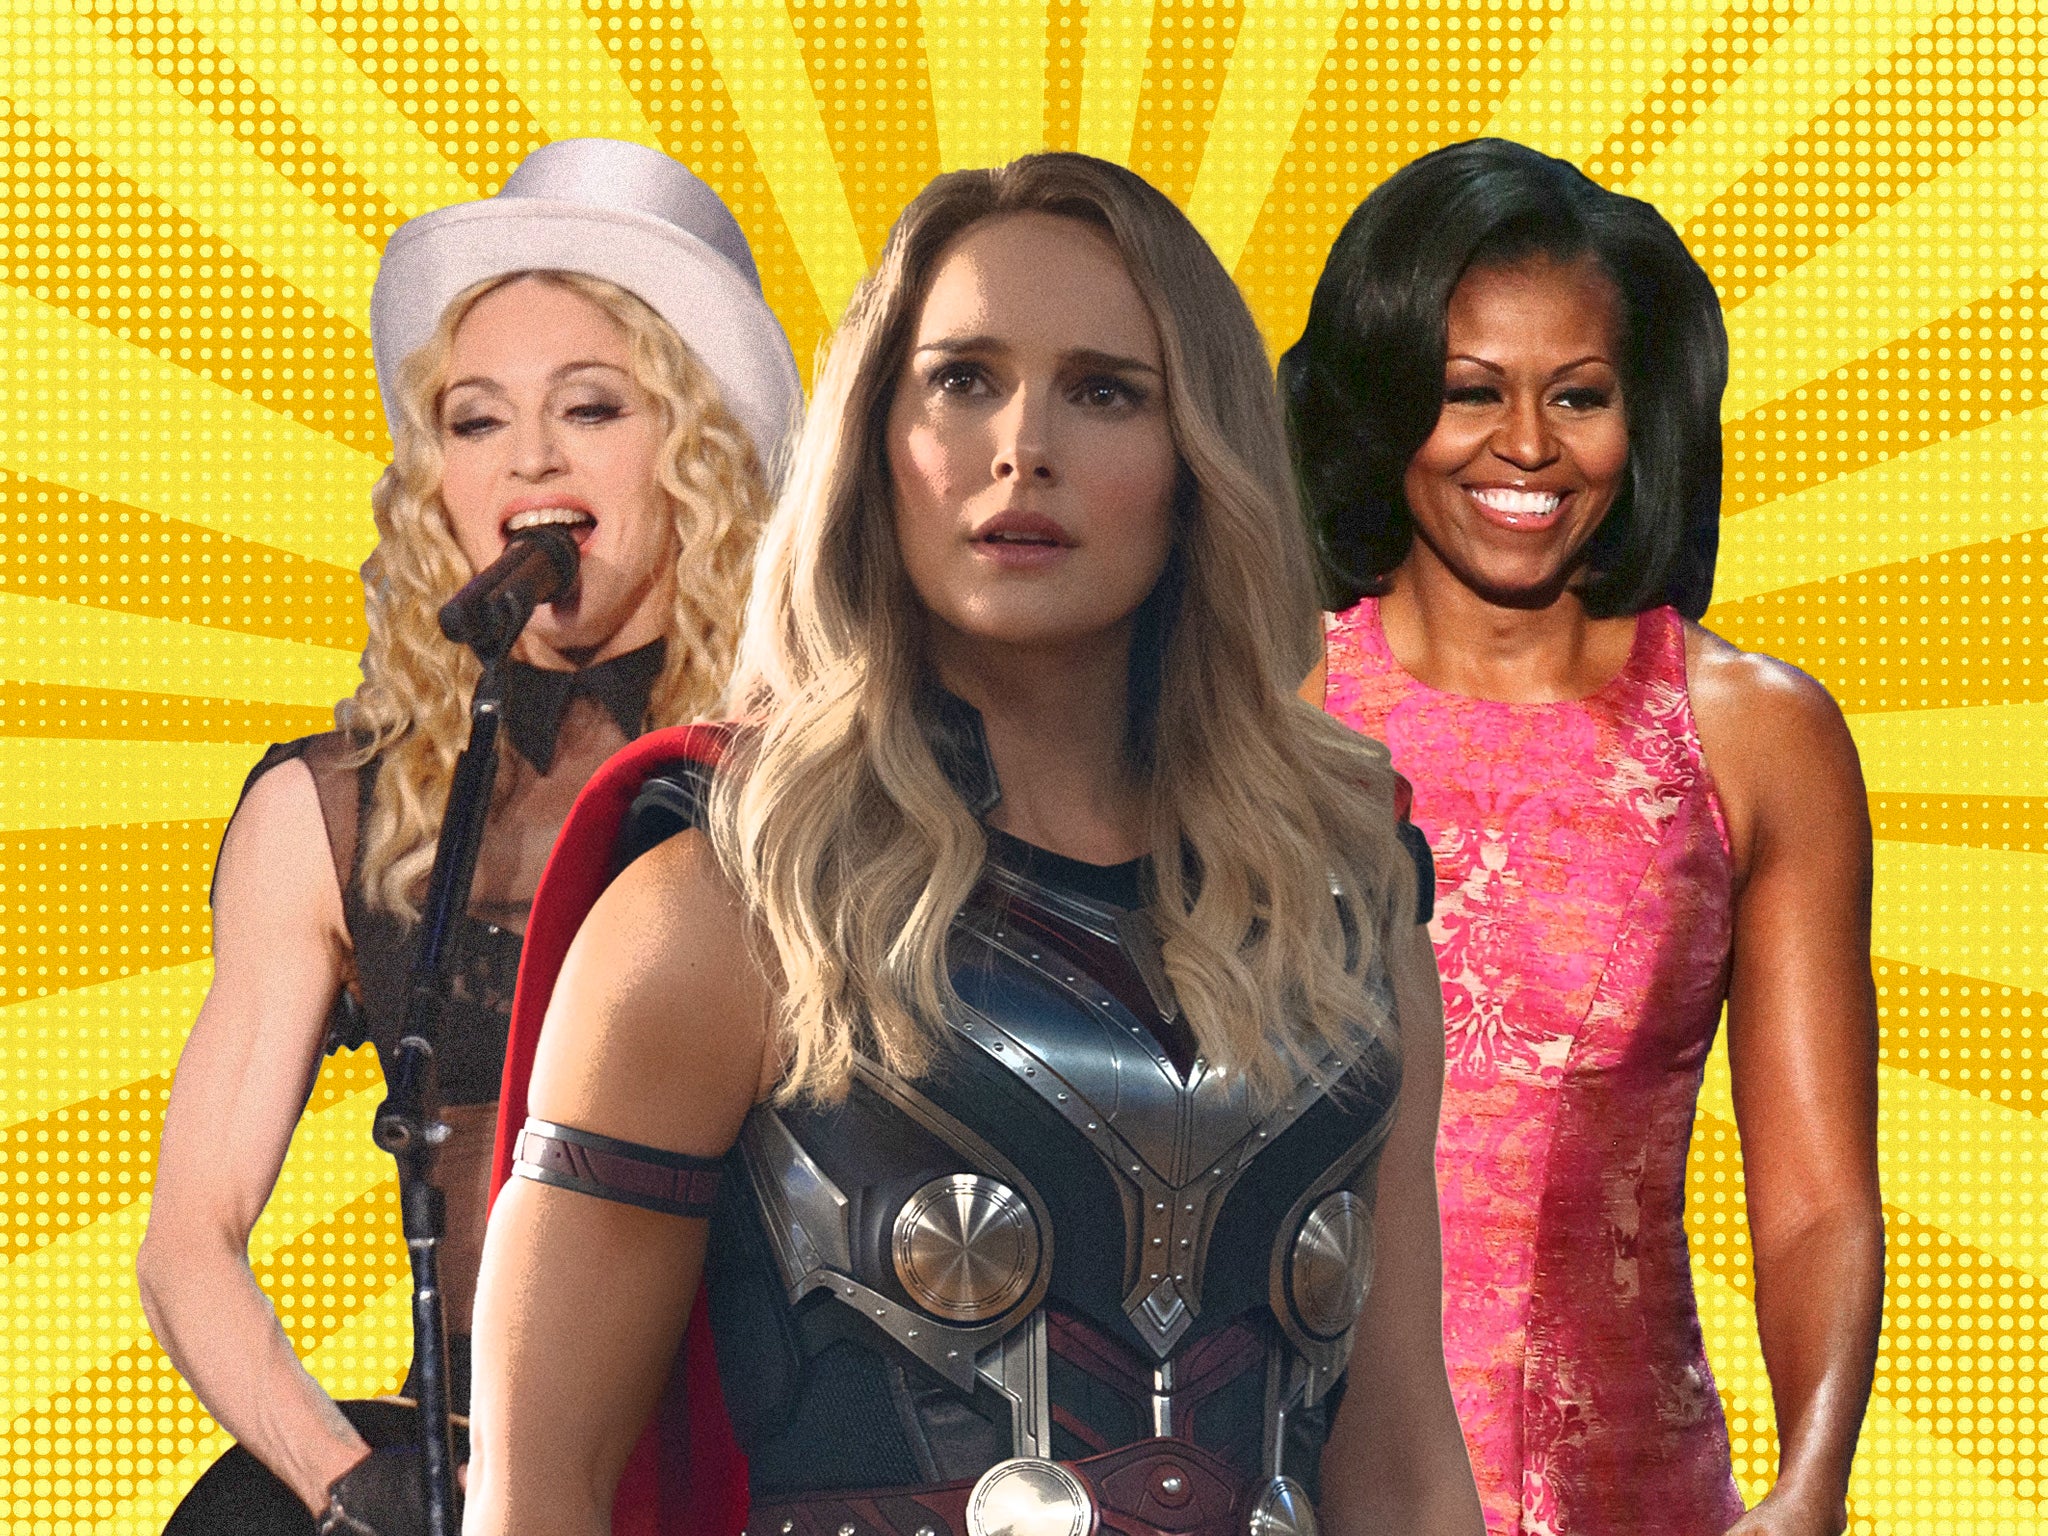 Top guns: Madonna, Natalie Portman in ‘Thor: Love and Thunder’, and Michelle Obama